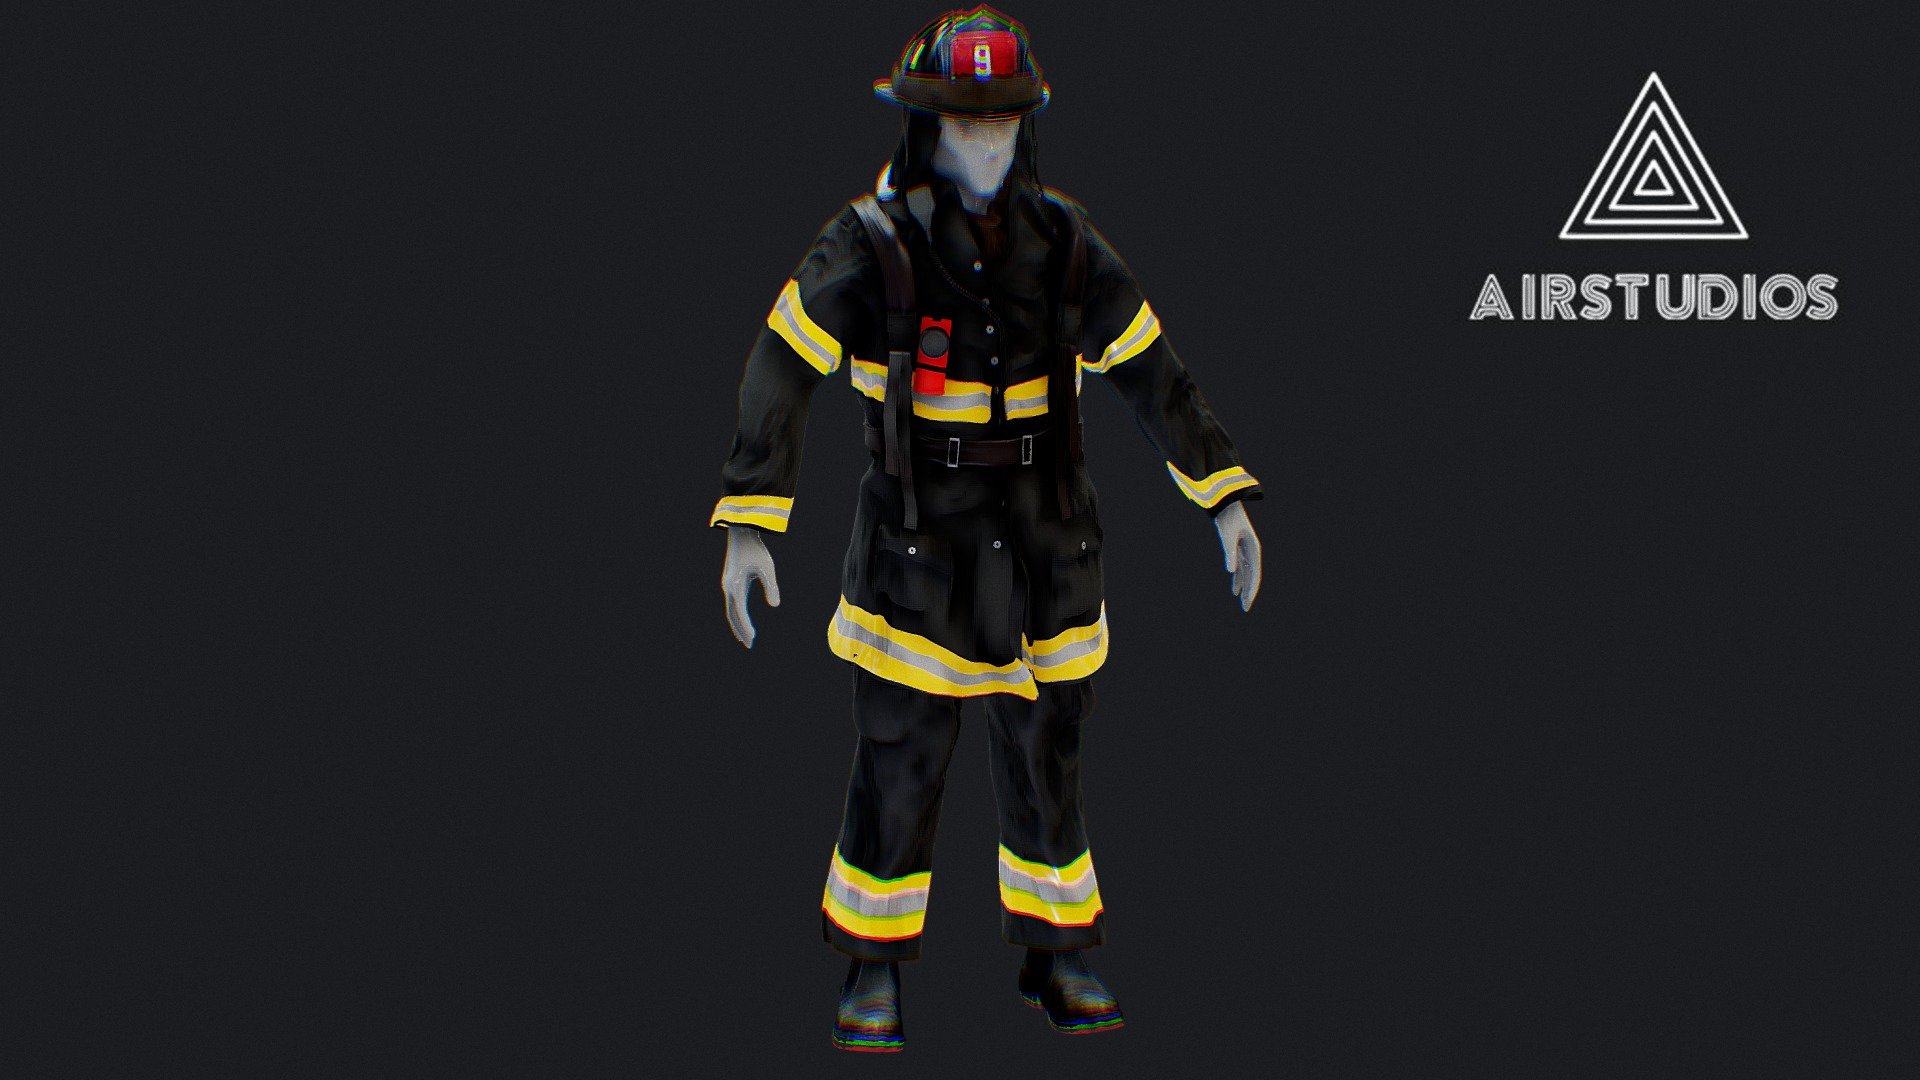 New York City Fire Fighter Uniform

Made in Blender - New York City Firefighter Uniform - Buy Royalty Free 3D model by AirStudios (@sebbe613) 3d model